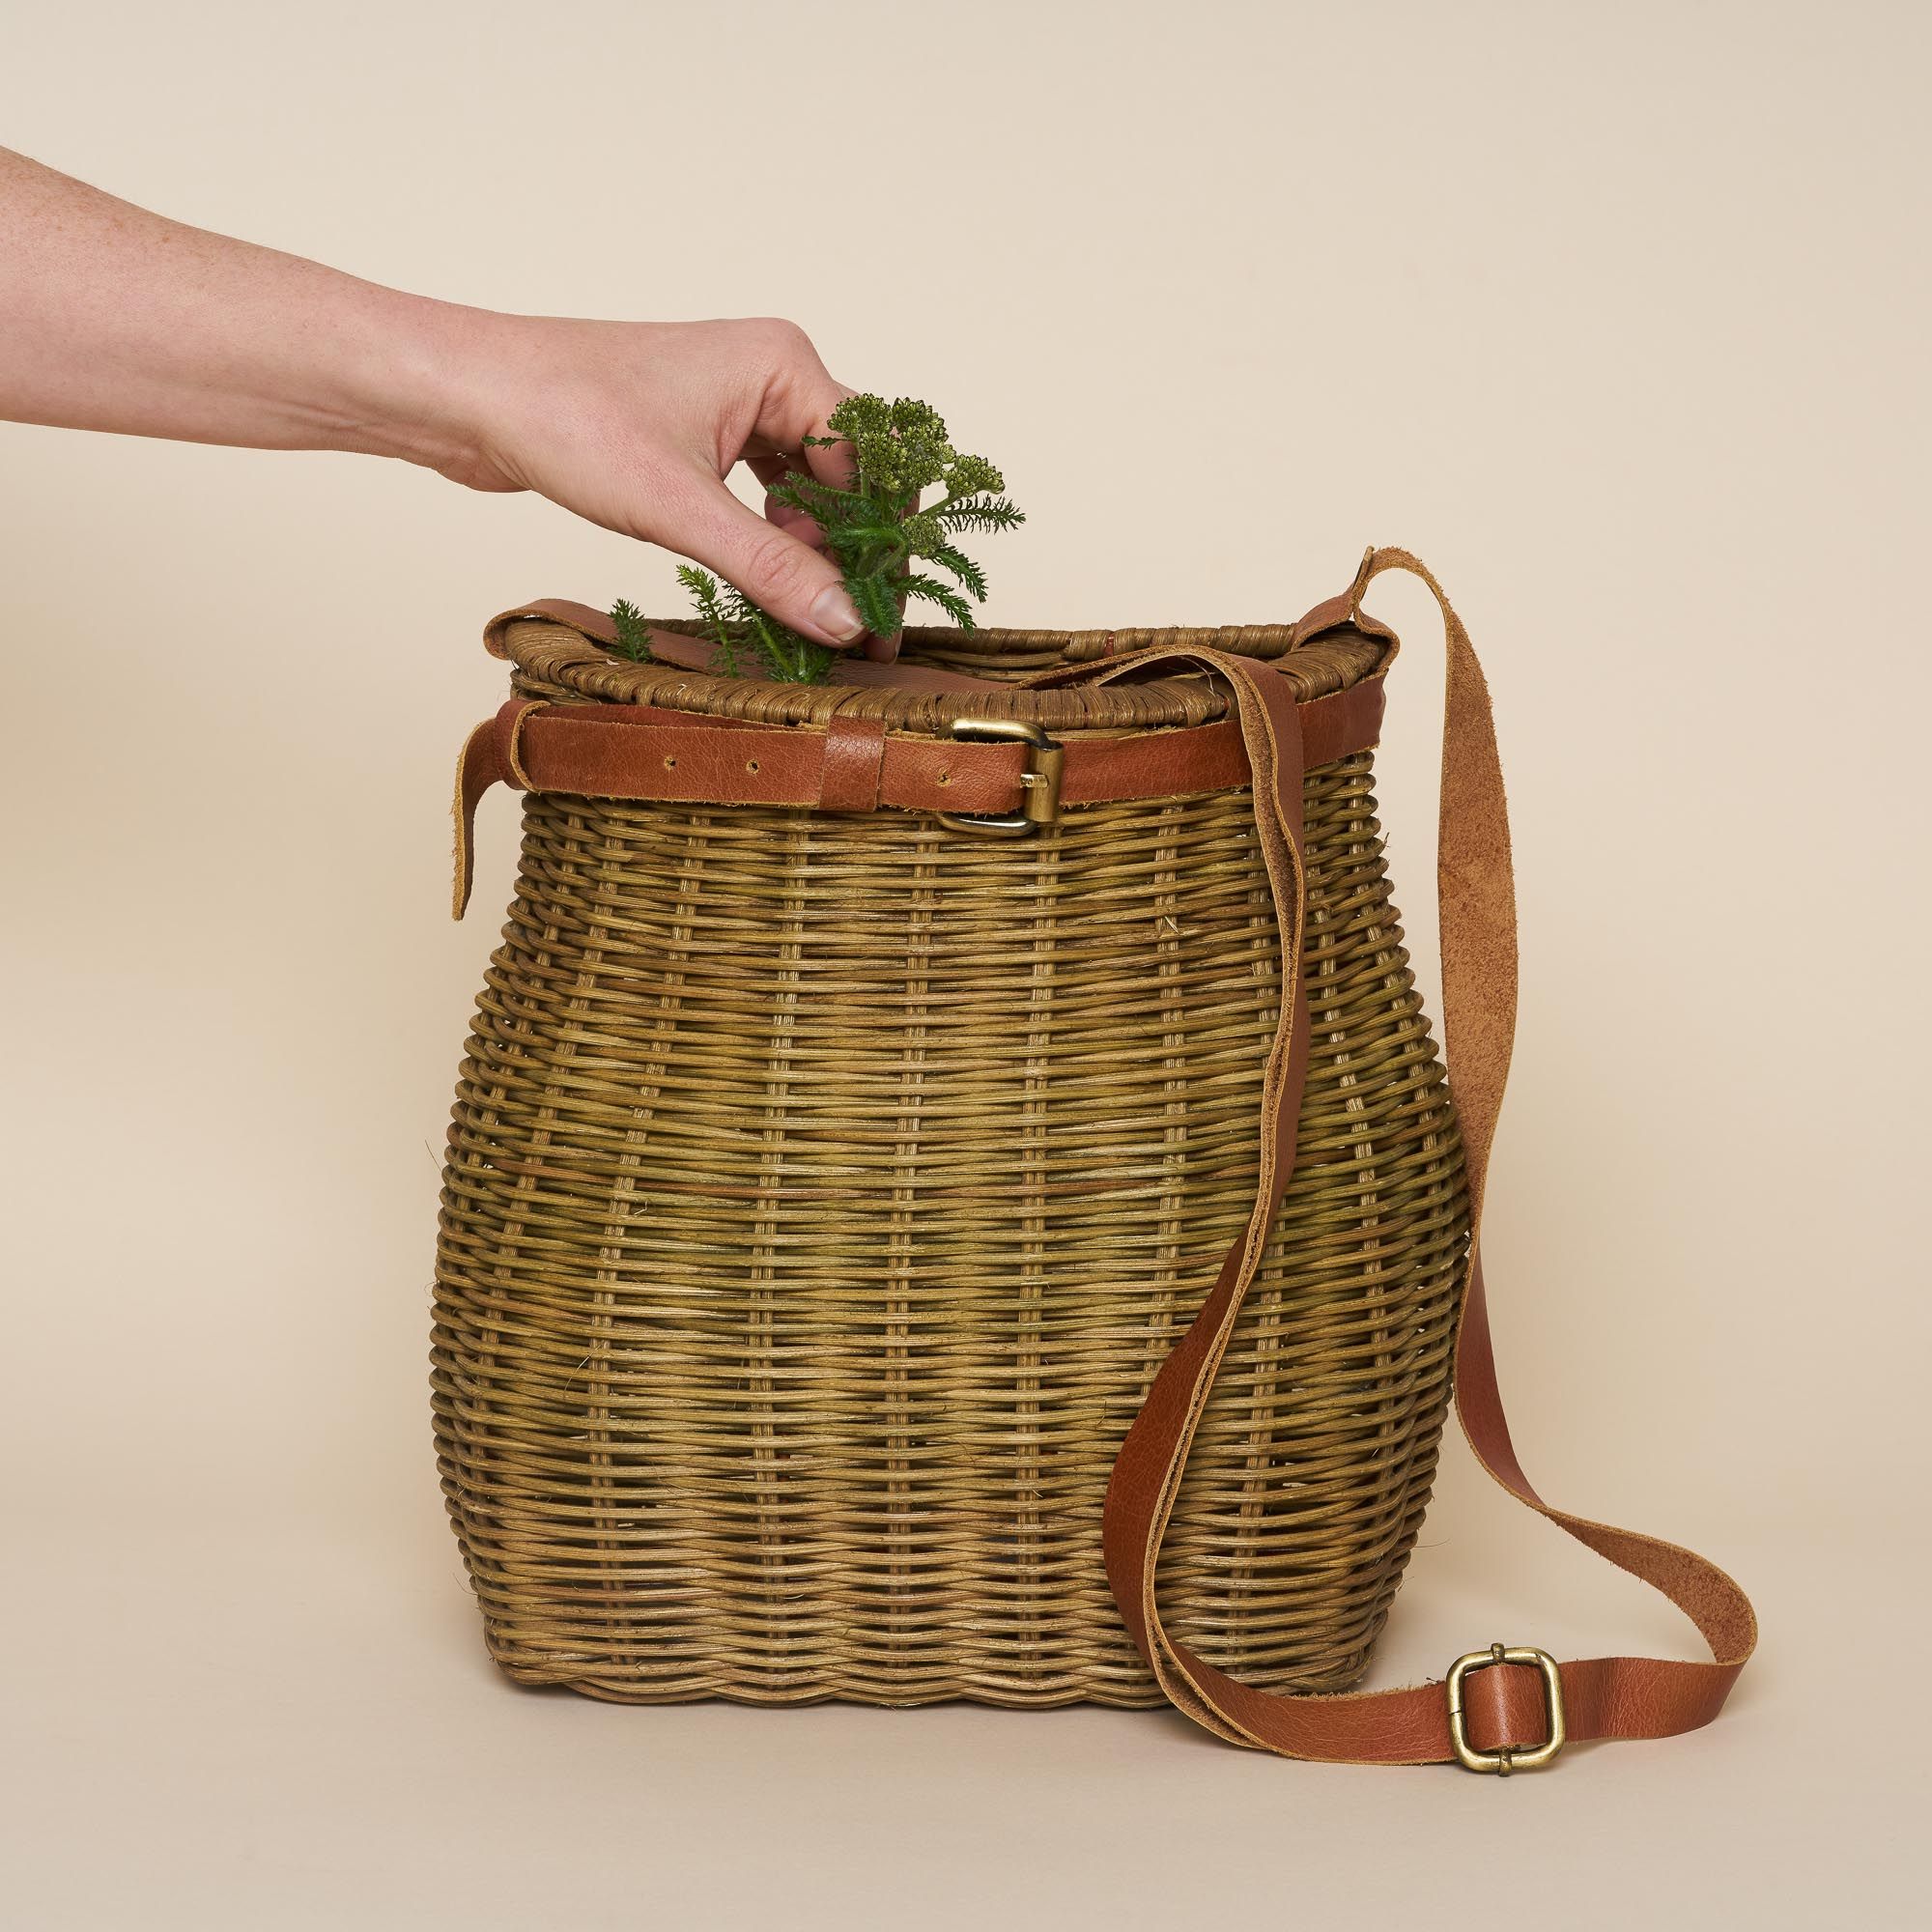 A wicker foraging basket with a leather strap